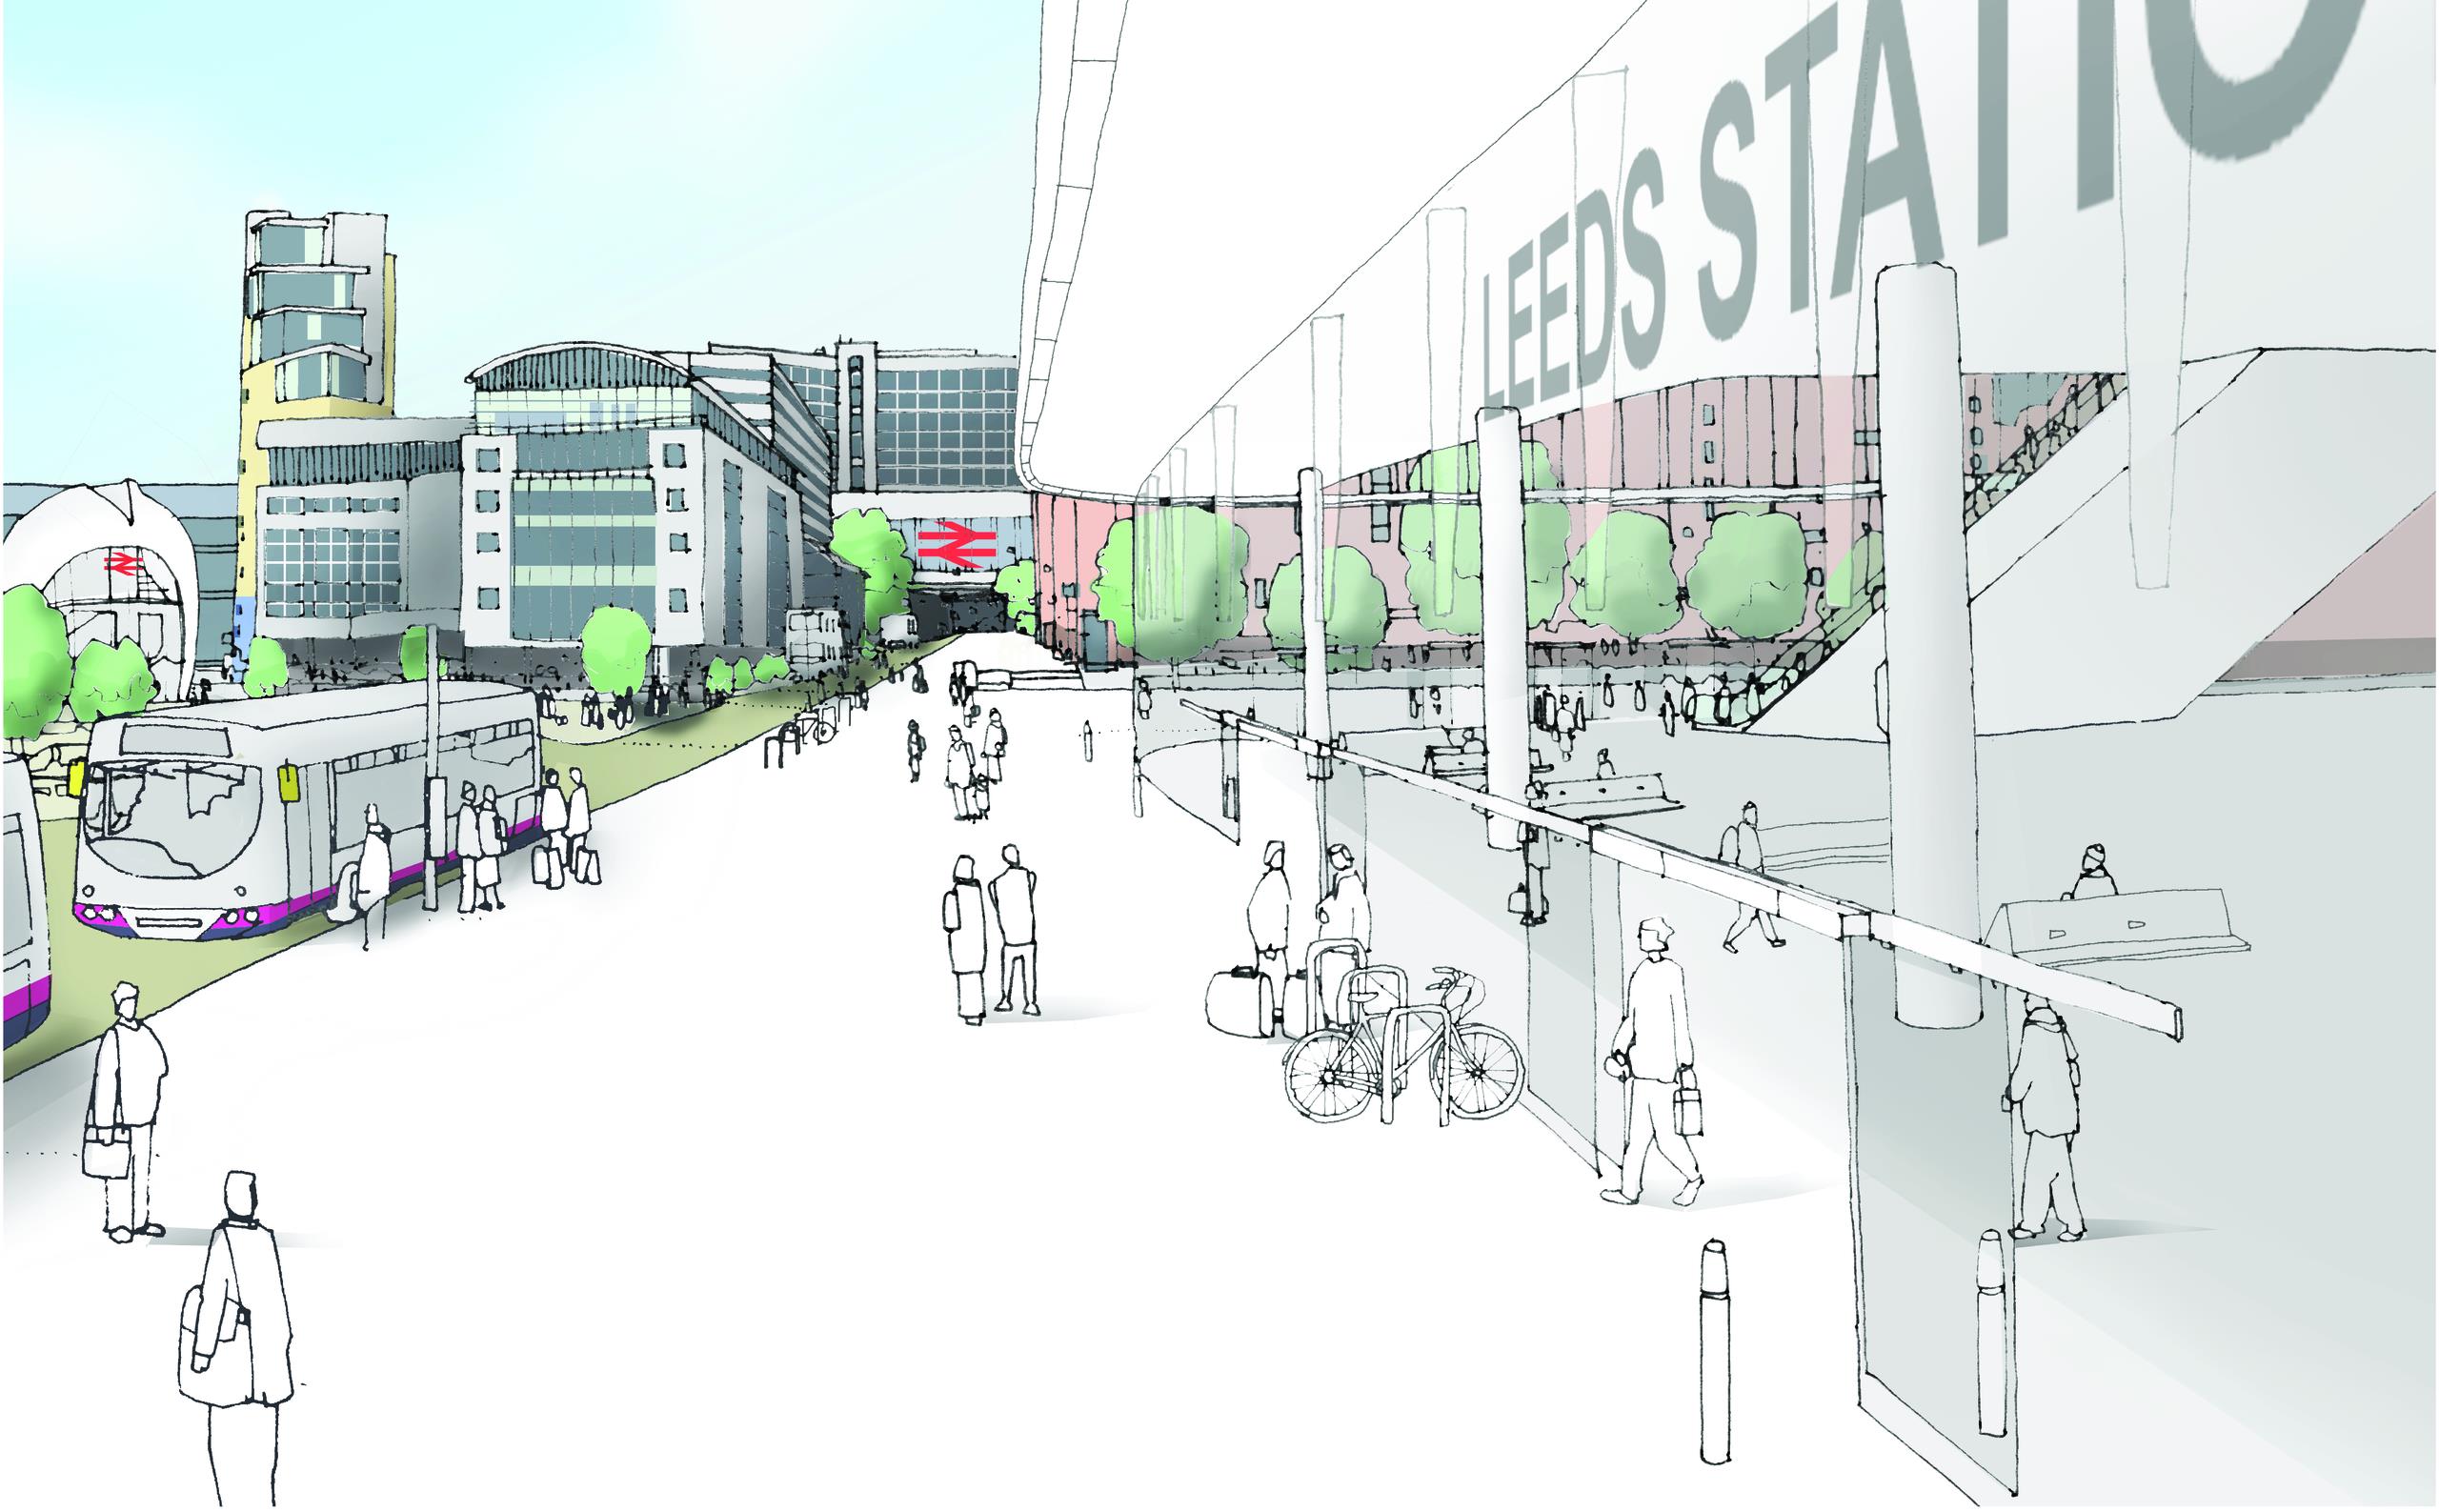 Design of Leeds Station once HS2 has been completed